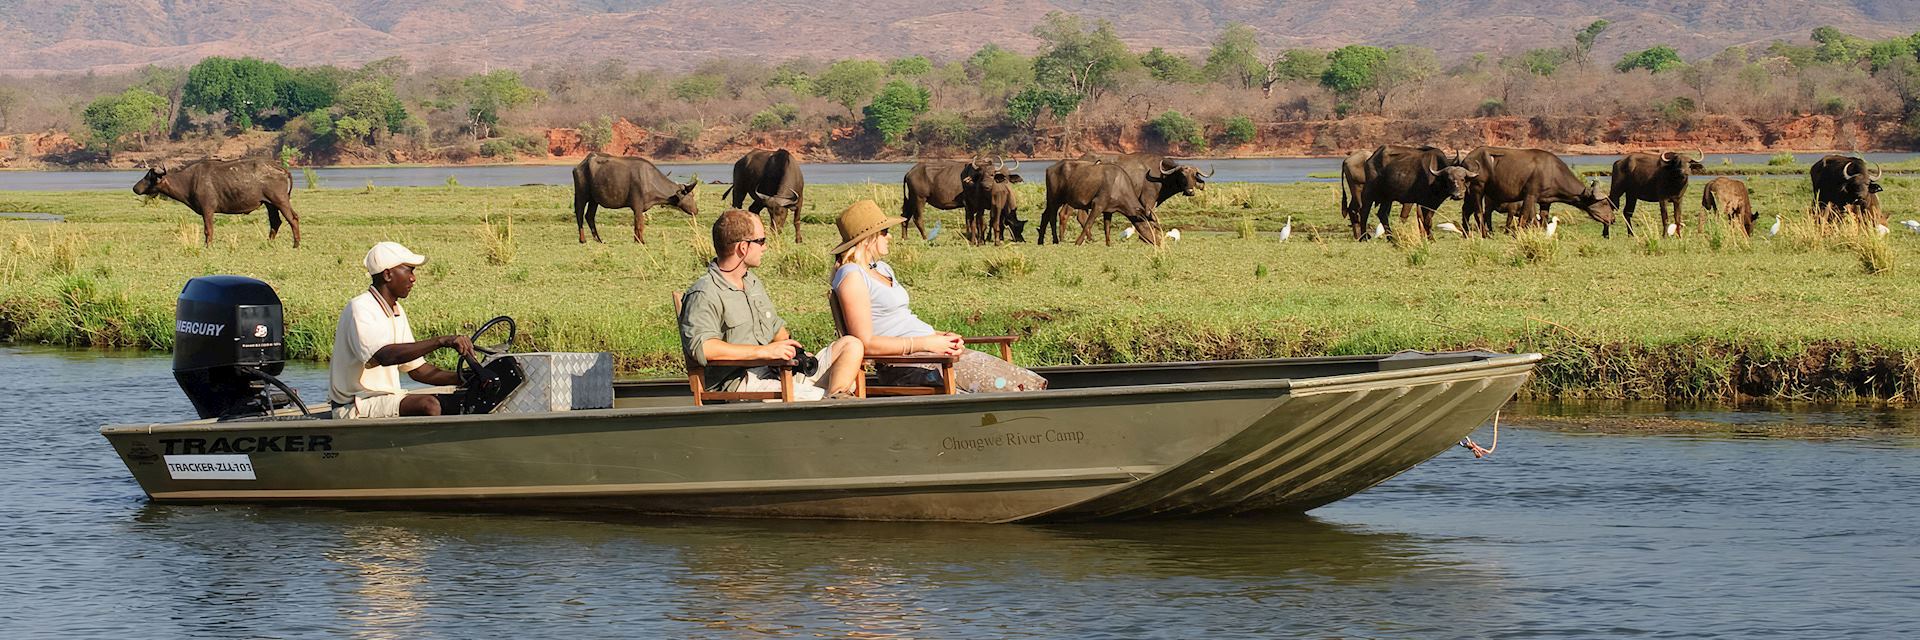 River cruise from Chongwe River Camp